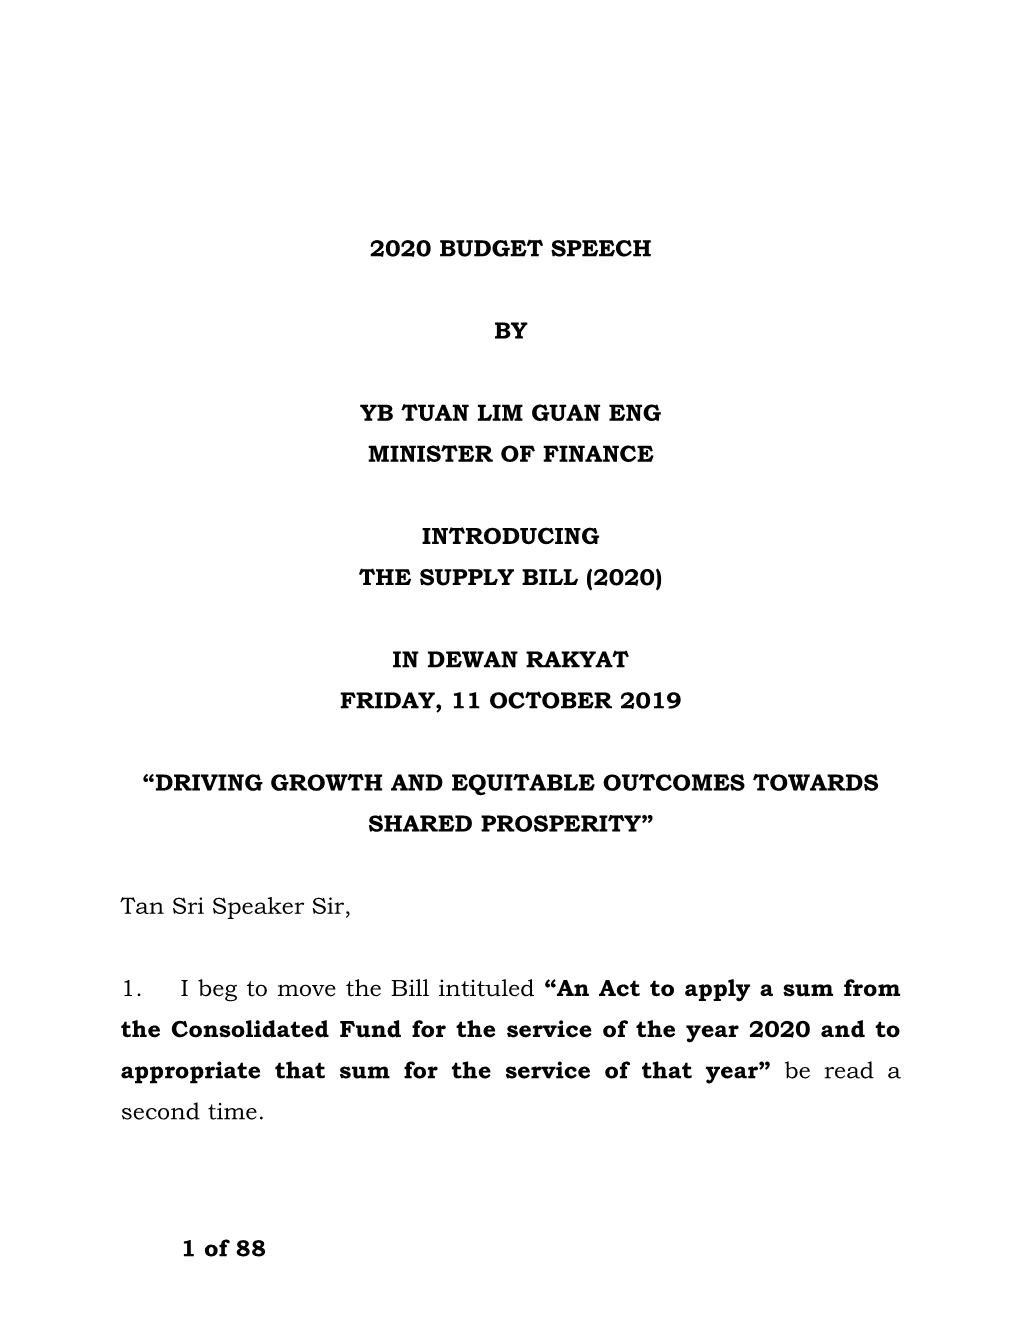 1 of 88 2020 BUDGET SPEECH by YB TUAN LIM GUAN ENG MINISTER of FINANCE INTRODUCING the SUPPLY BILL